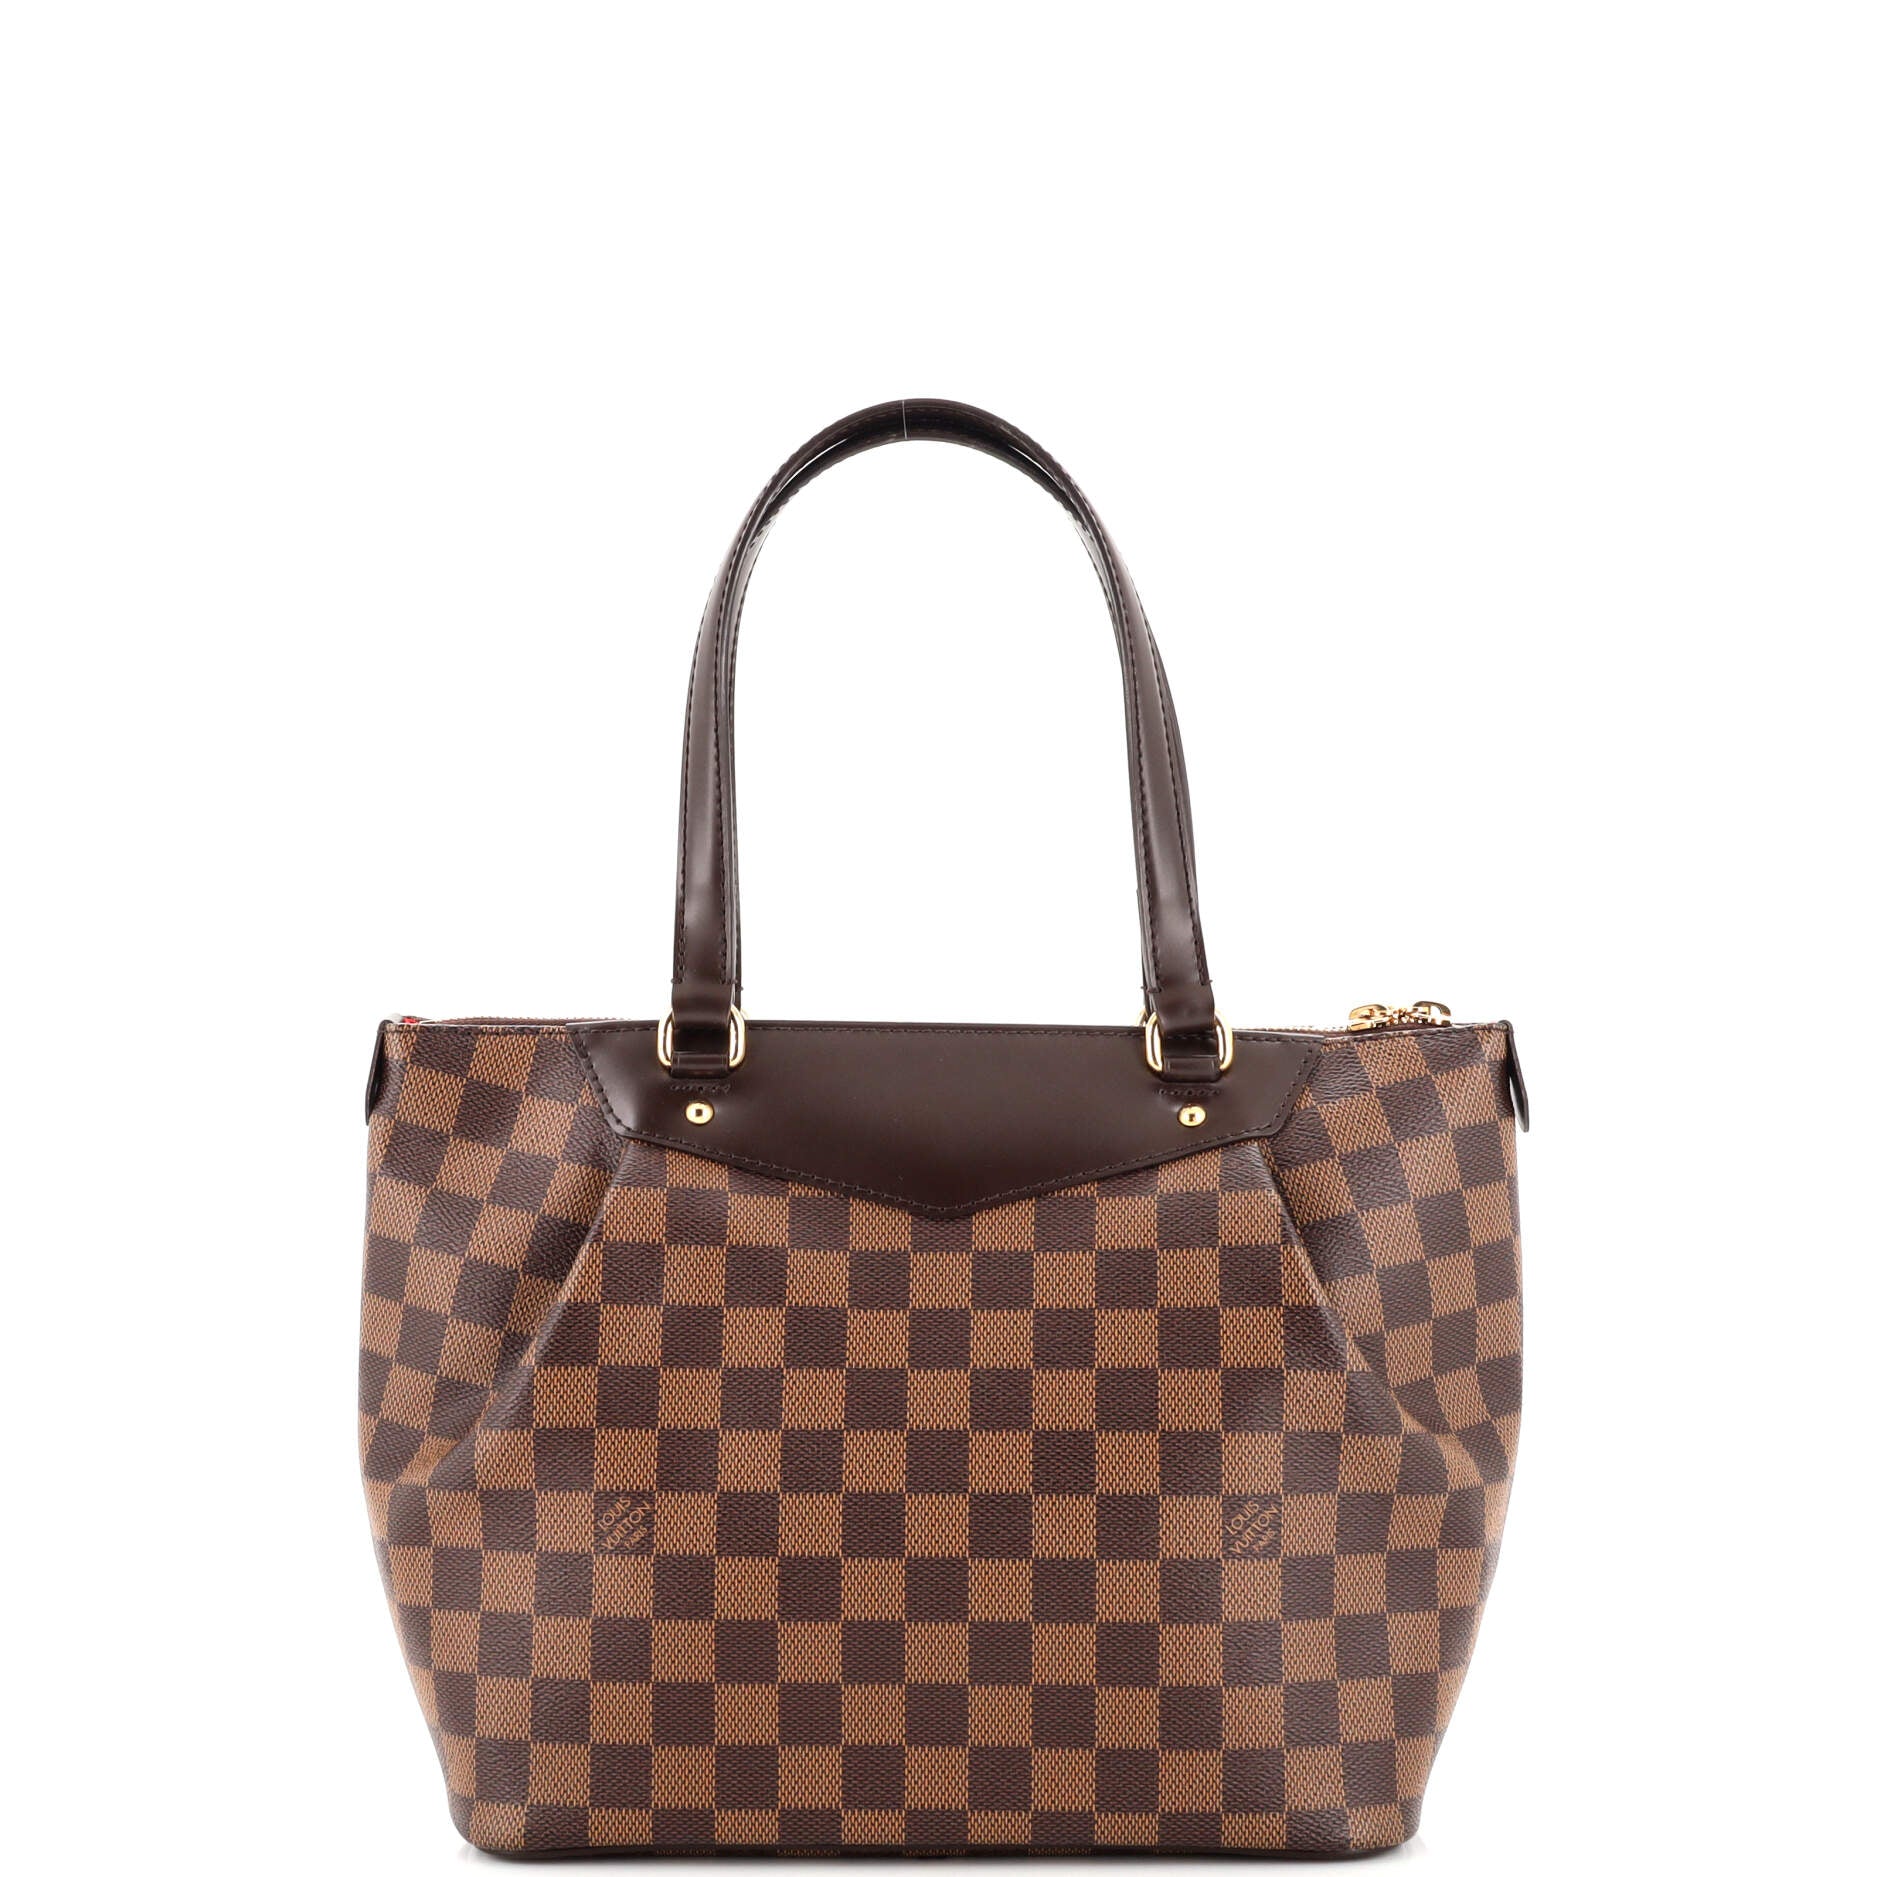 Louis Vuitton Westminster GM Damier Ebene Tote on SALE